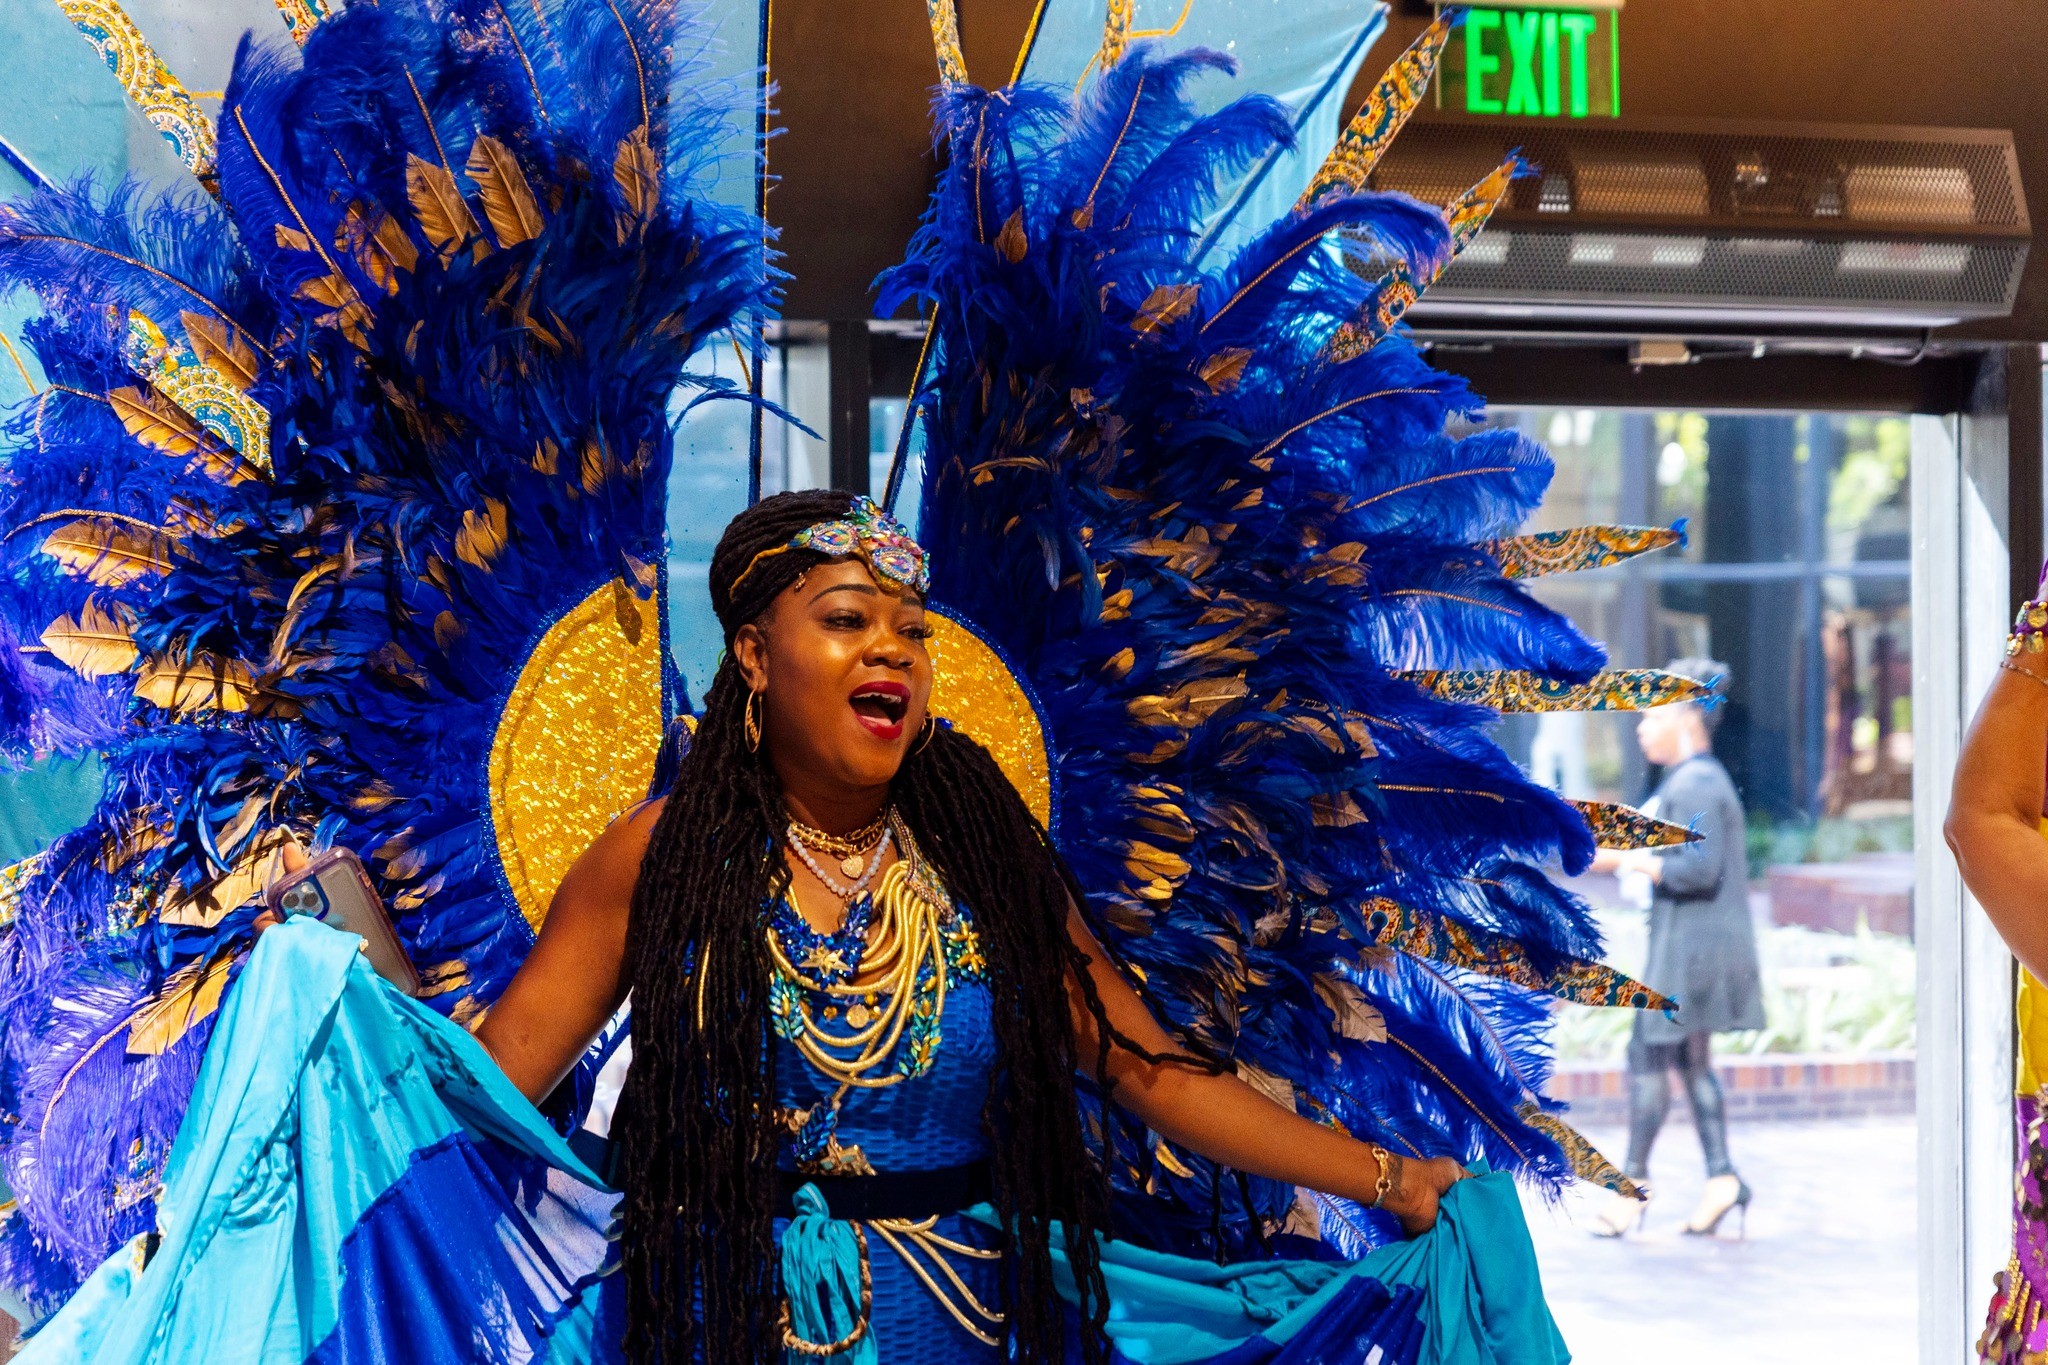 The 17th Annual Tampa Bay Caribbean Carnival returns to Tampa this weekend, Tampa